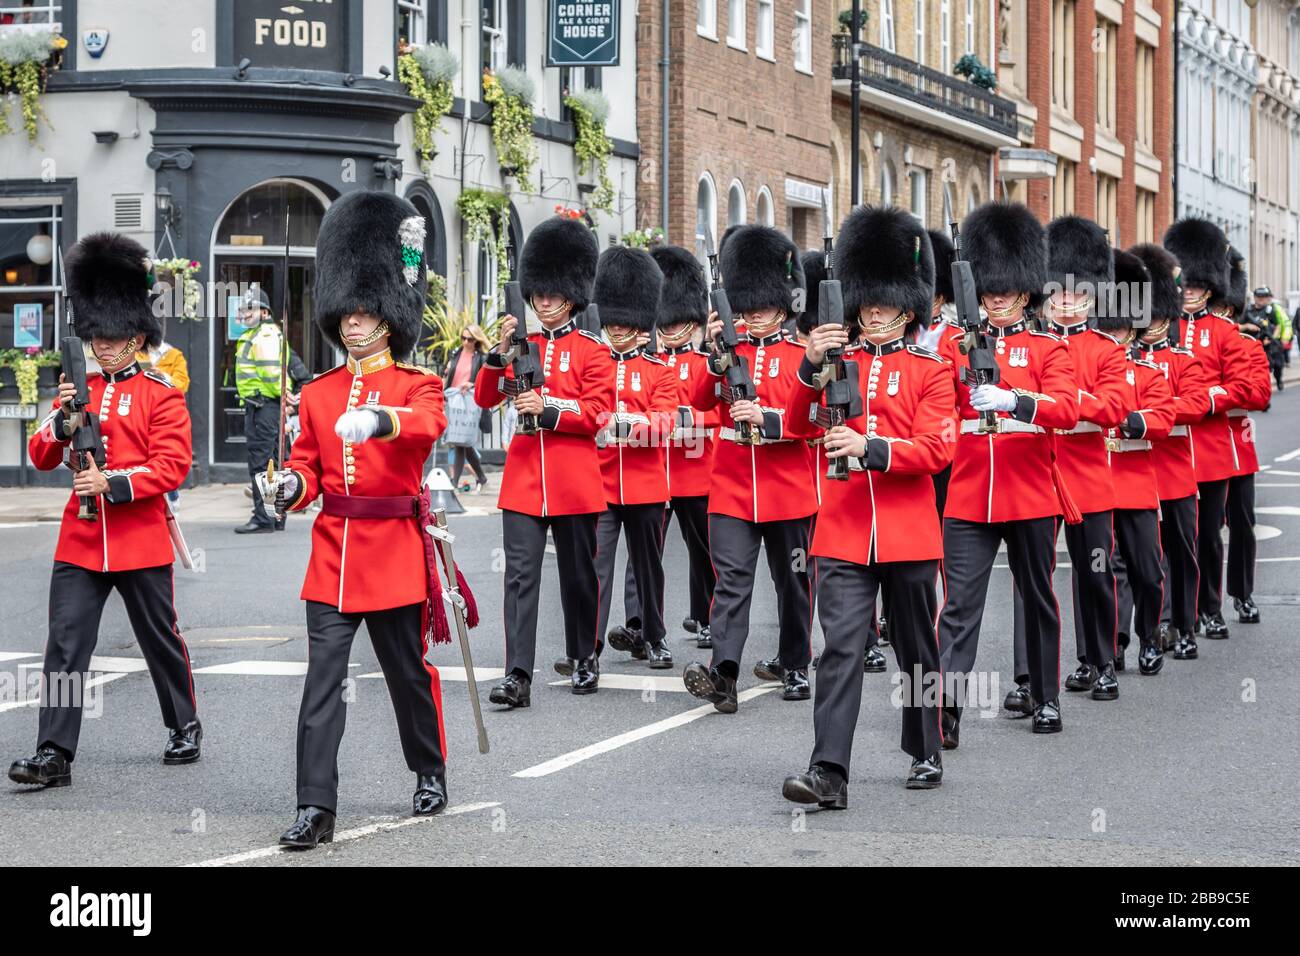 Soldiers of the Welsh Guards 'Change Arms' on the march back to Victoria barracks, Windsor, Berkshire, UK - May 28th 2019 Stock Photo